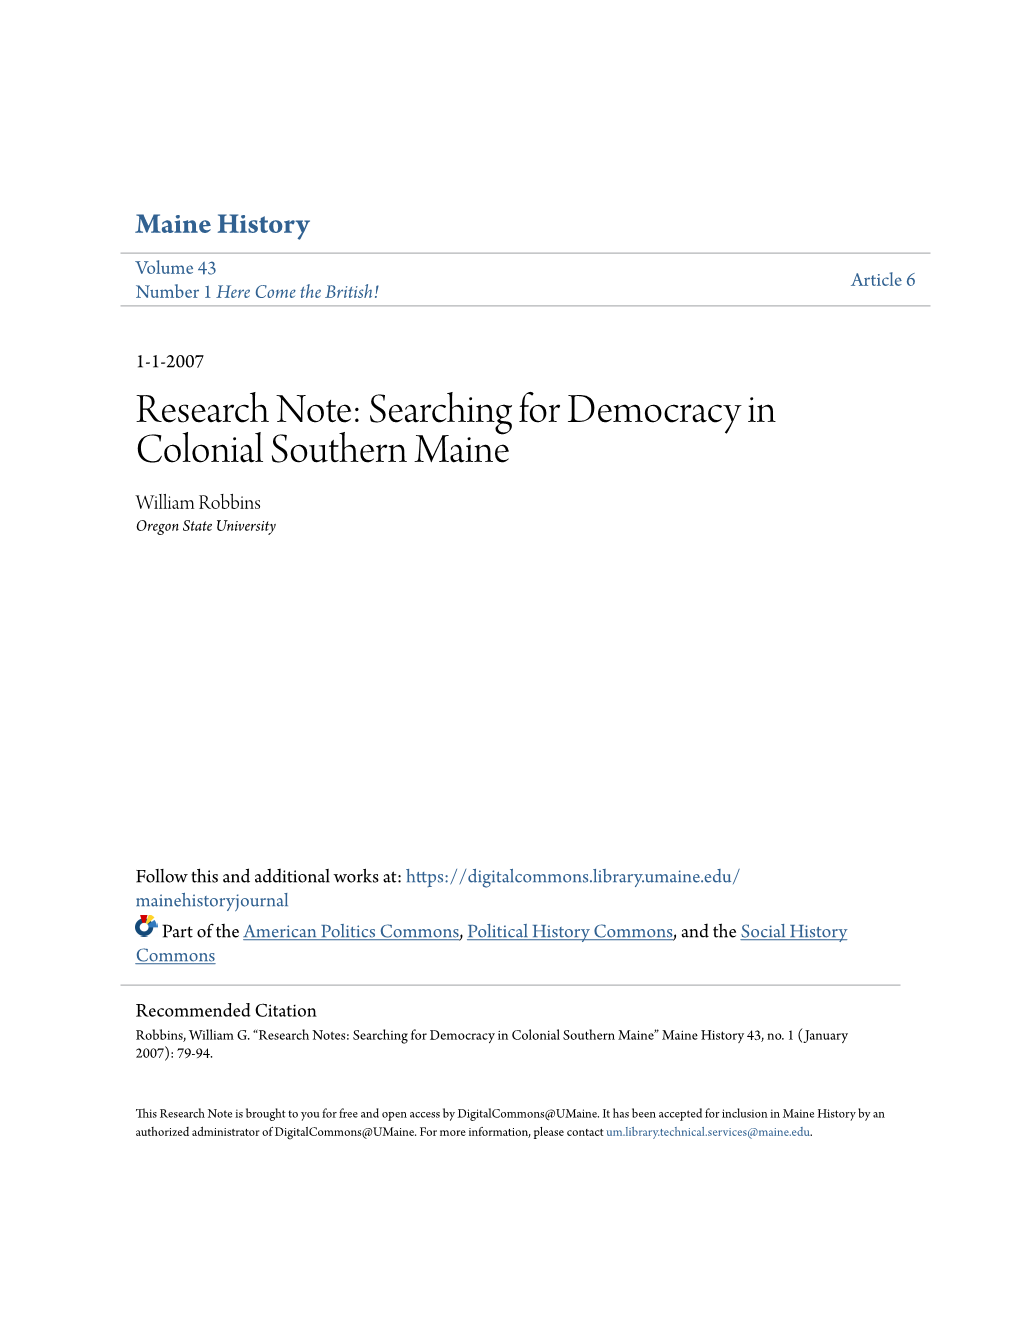 Searching for Democracy in Colonial Southern Maine William Robbins Oregon State University